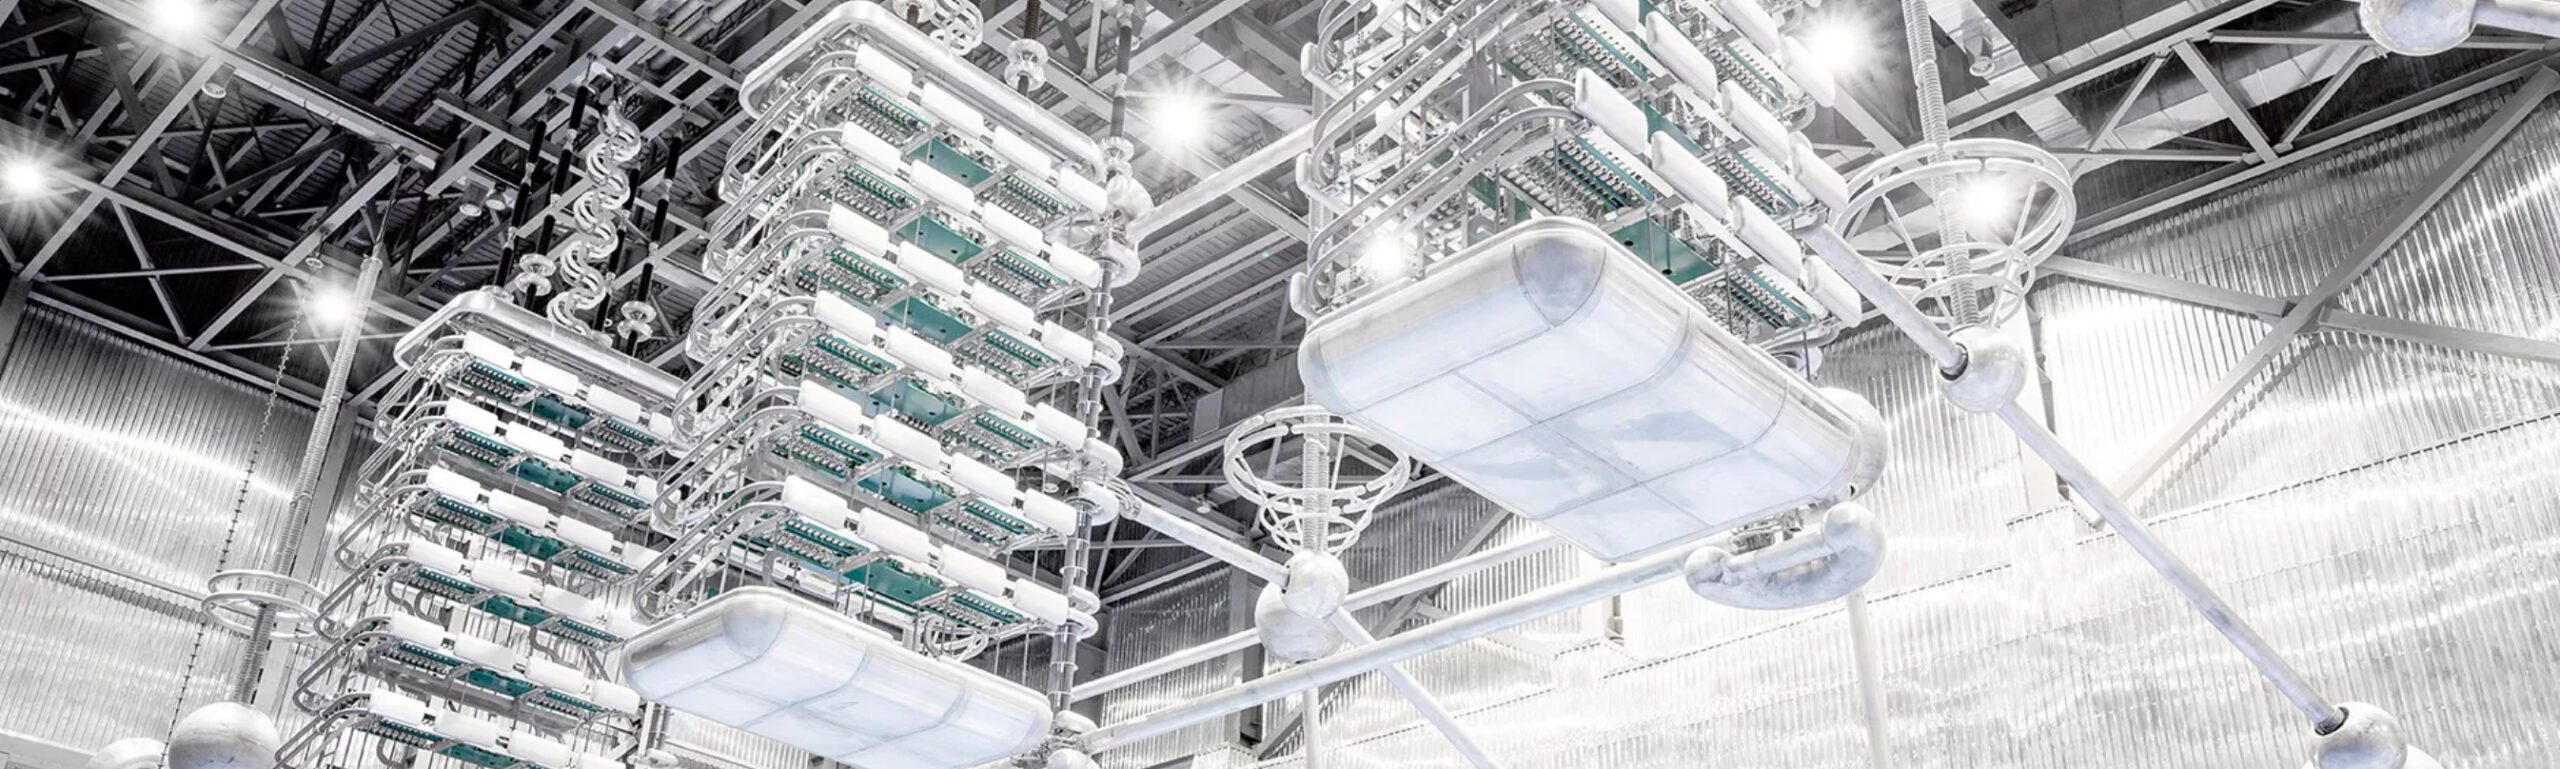 The Vital Link: How HVDC Is Modernizing the Grid